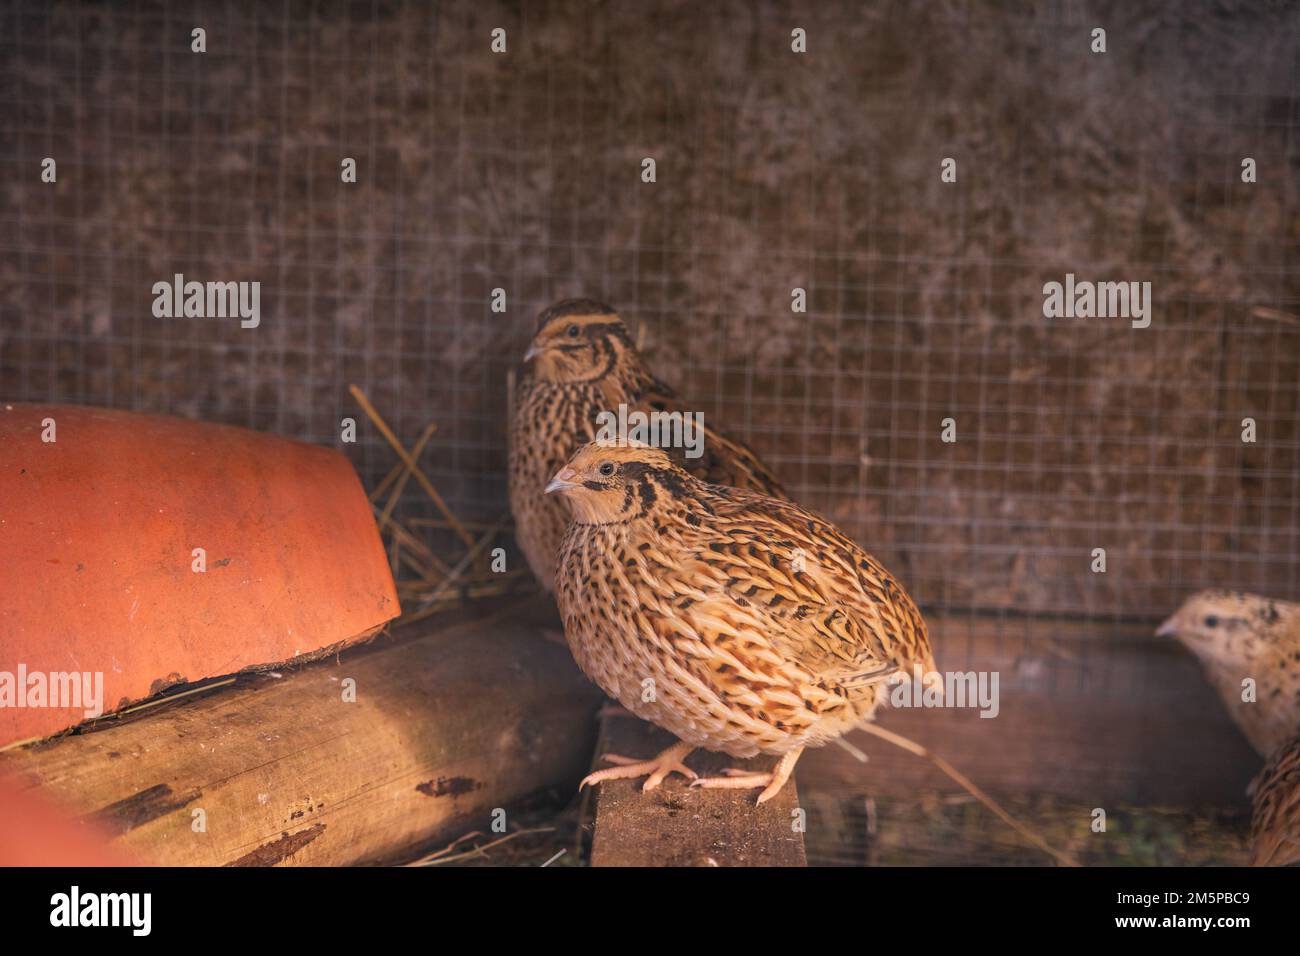 Quails in pen, cute animals used for eggs at farm. Stock Photo